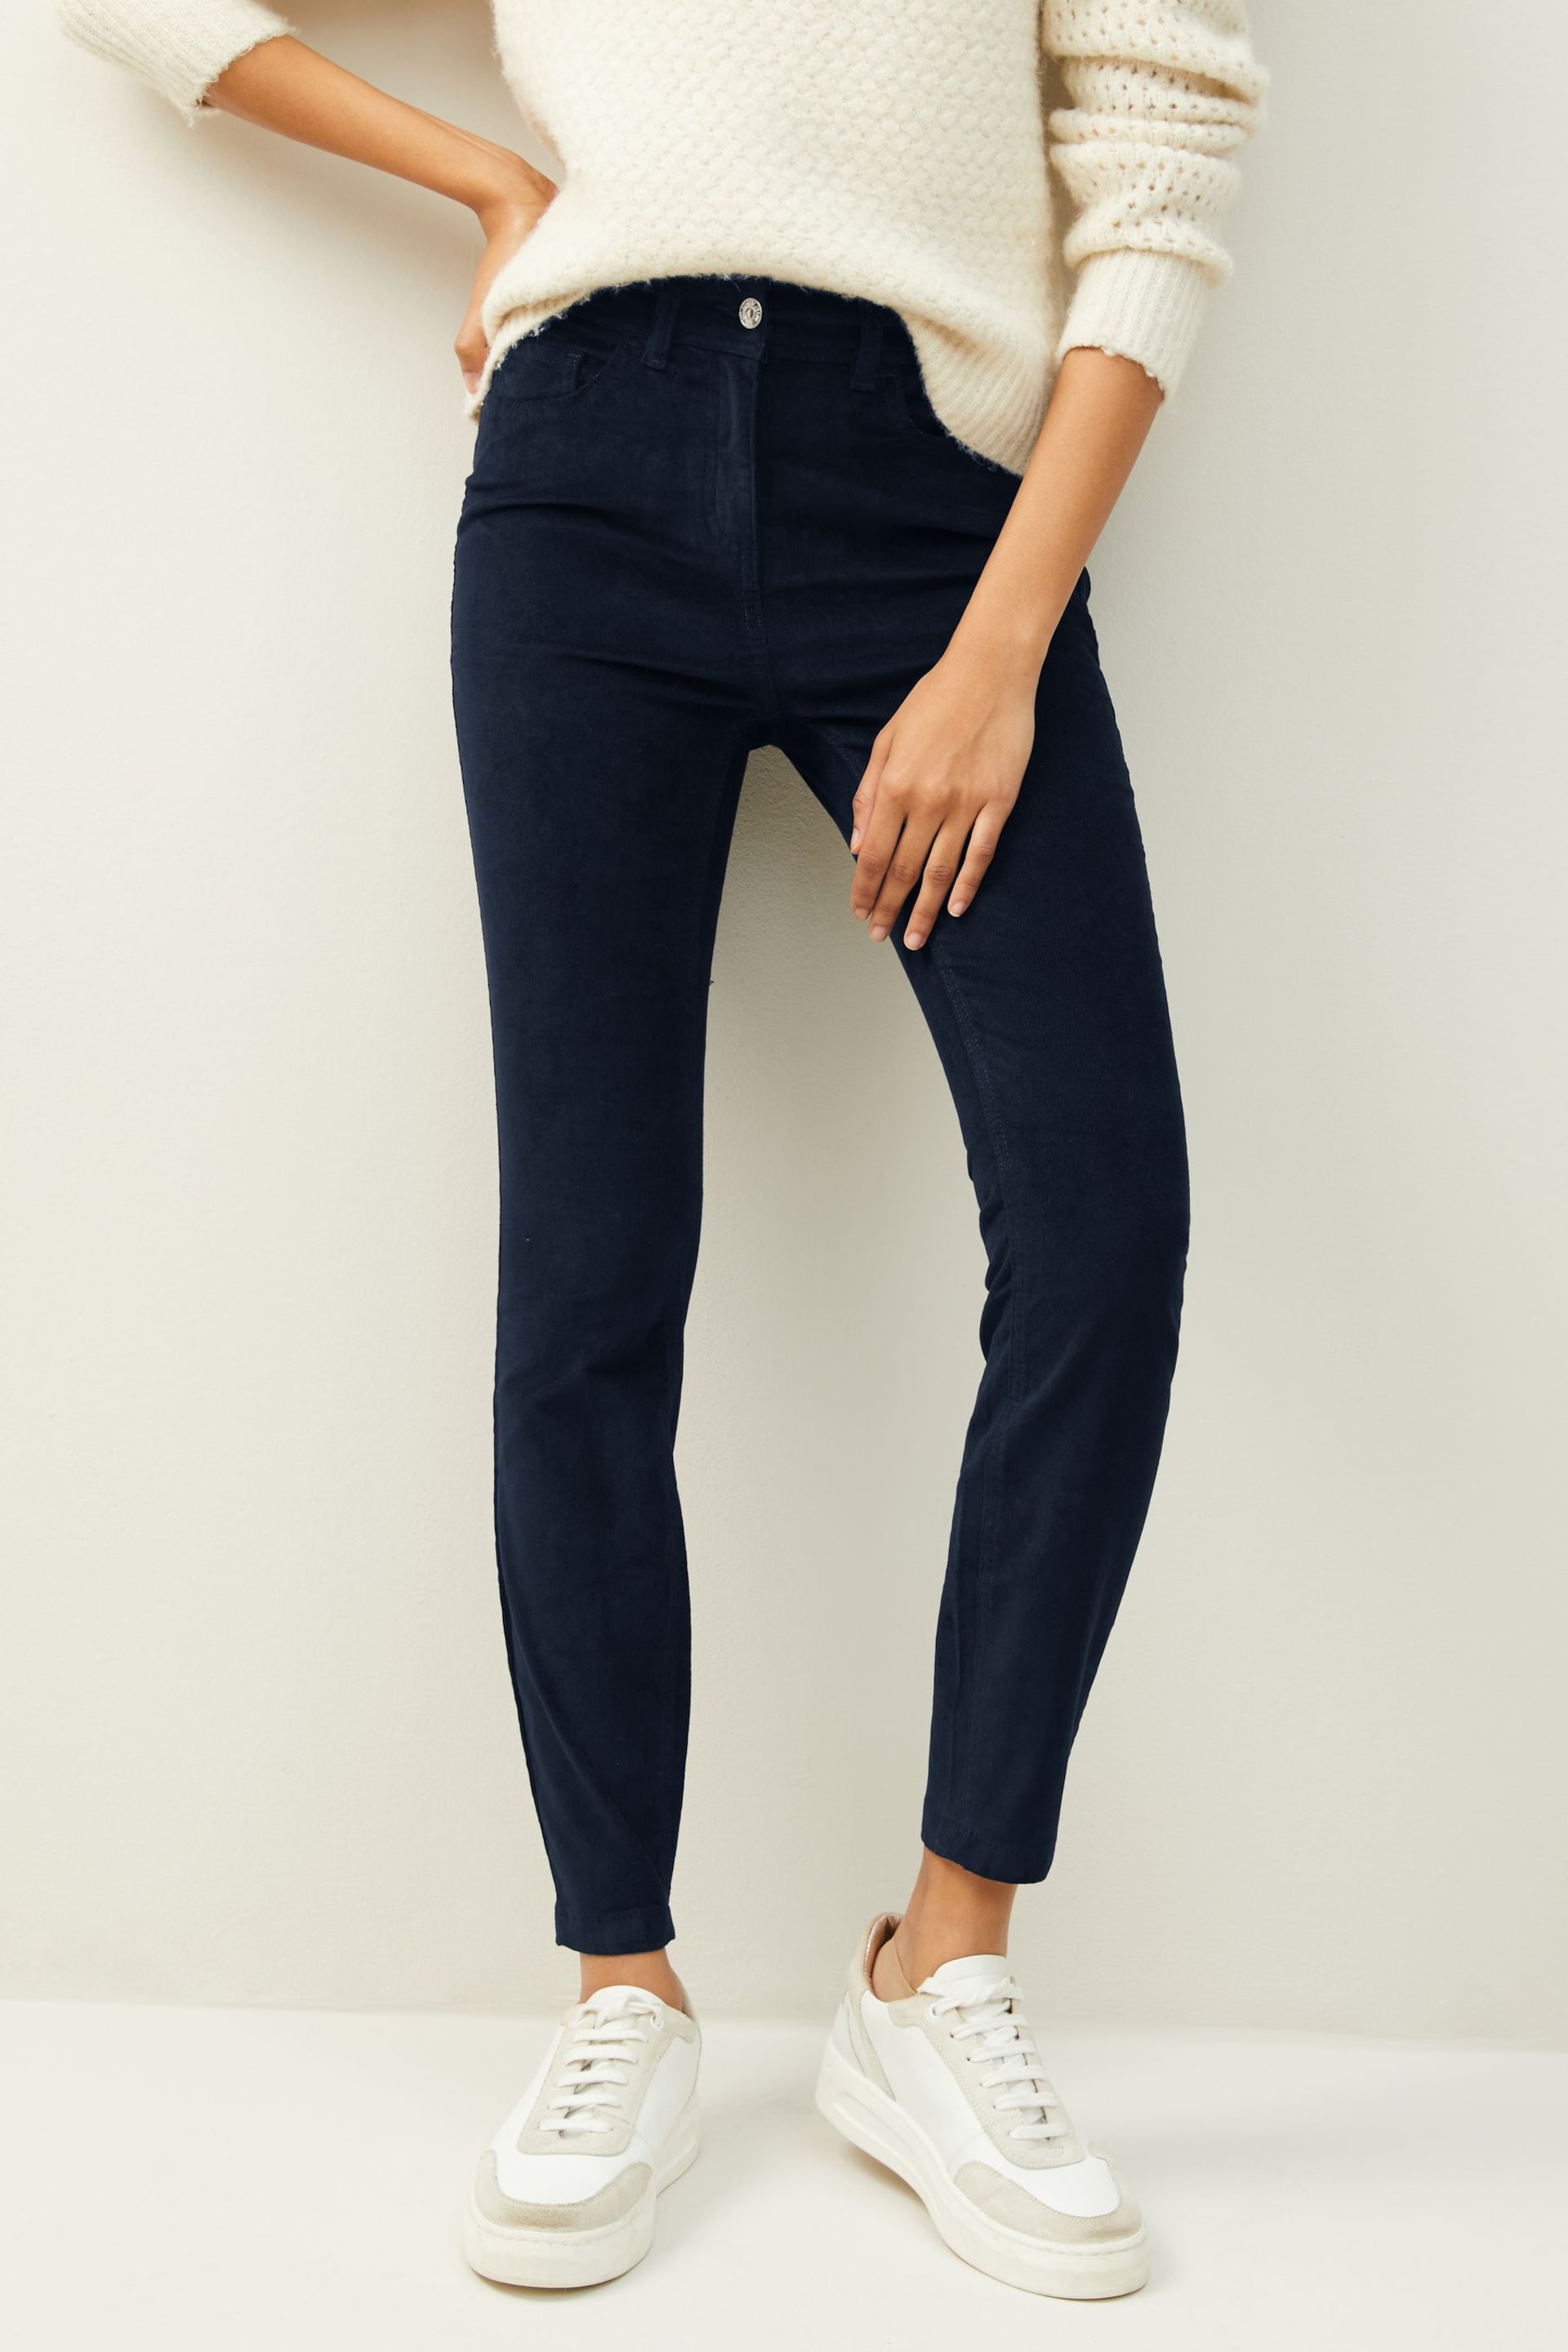 Navy Cord Trousers - Image 1 of 6